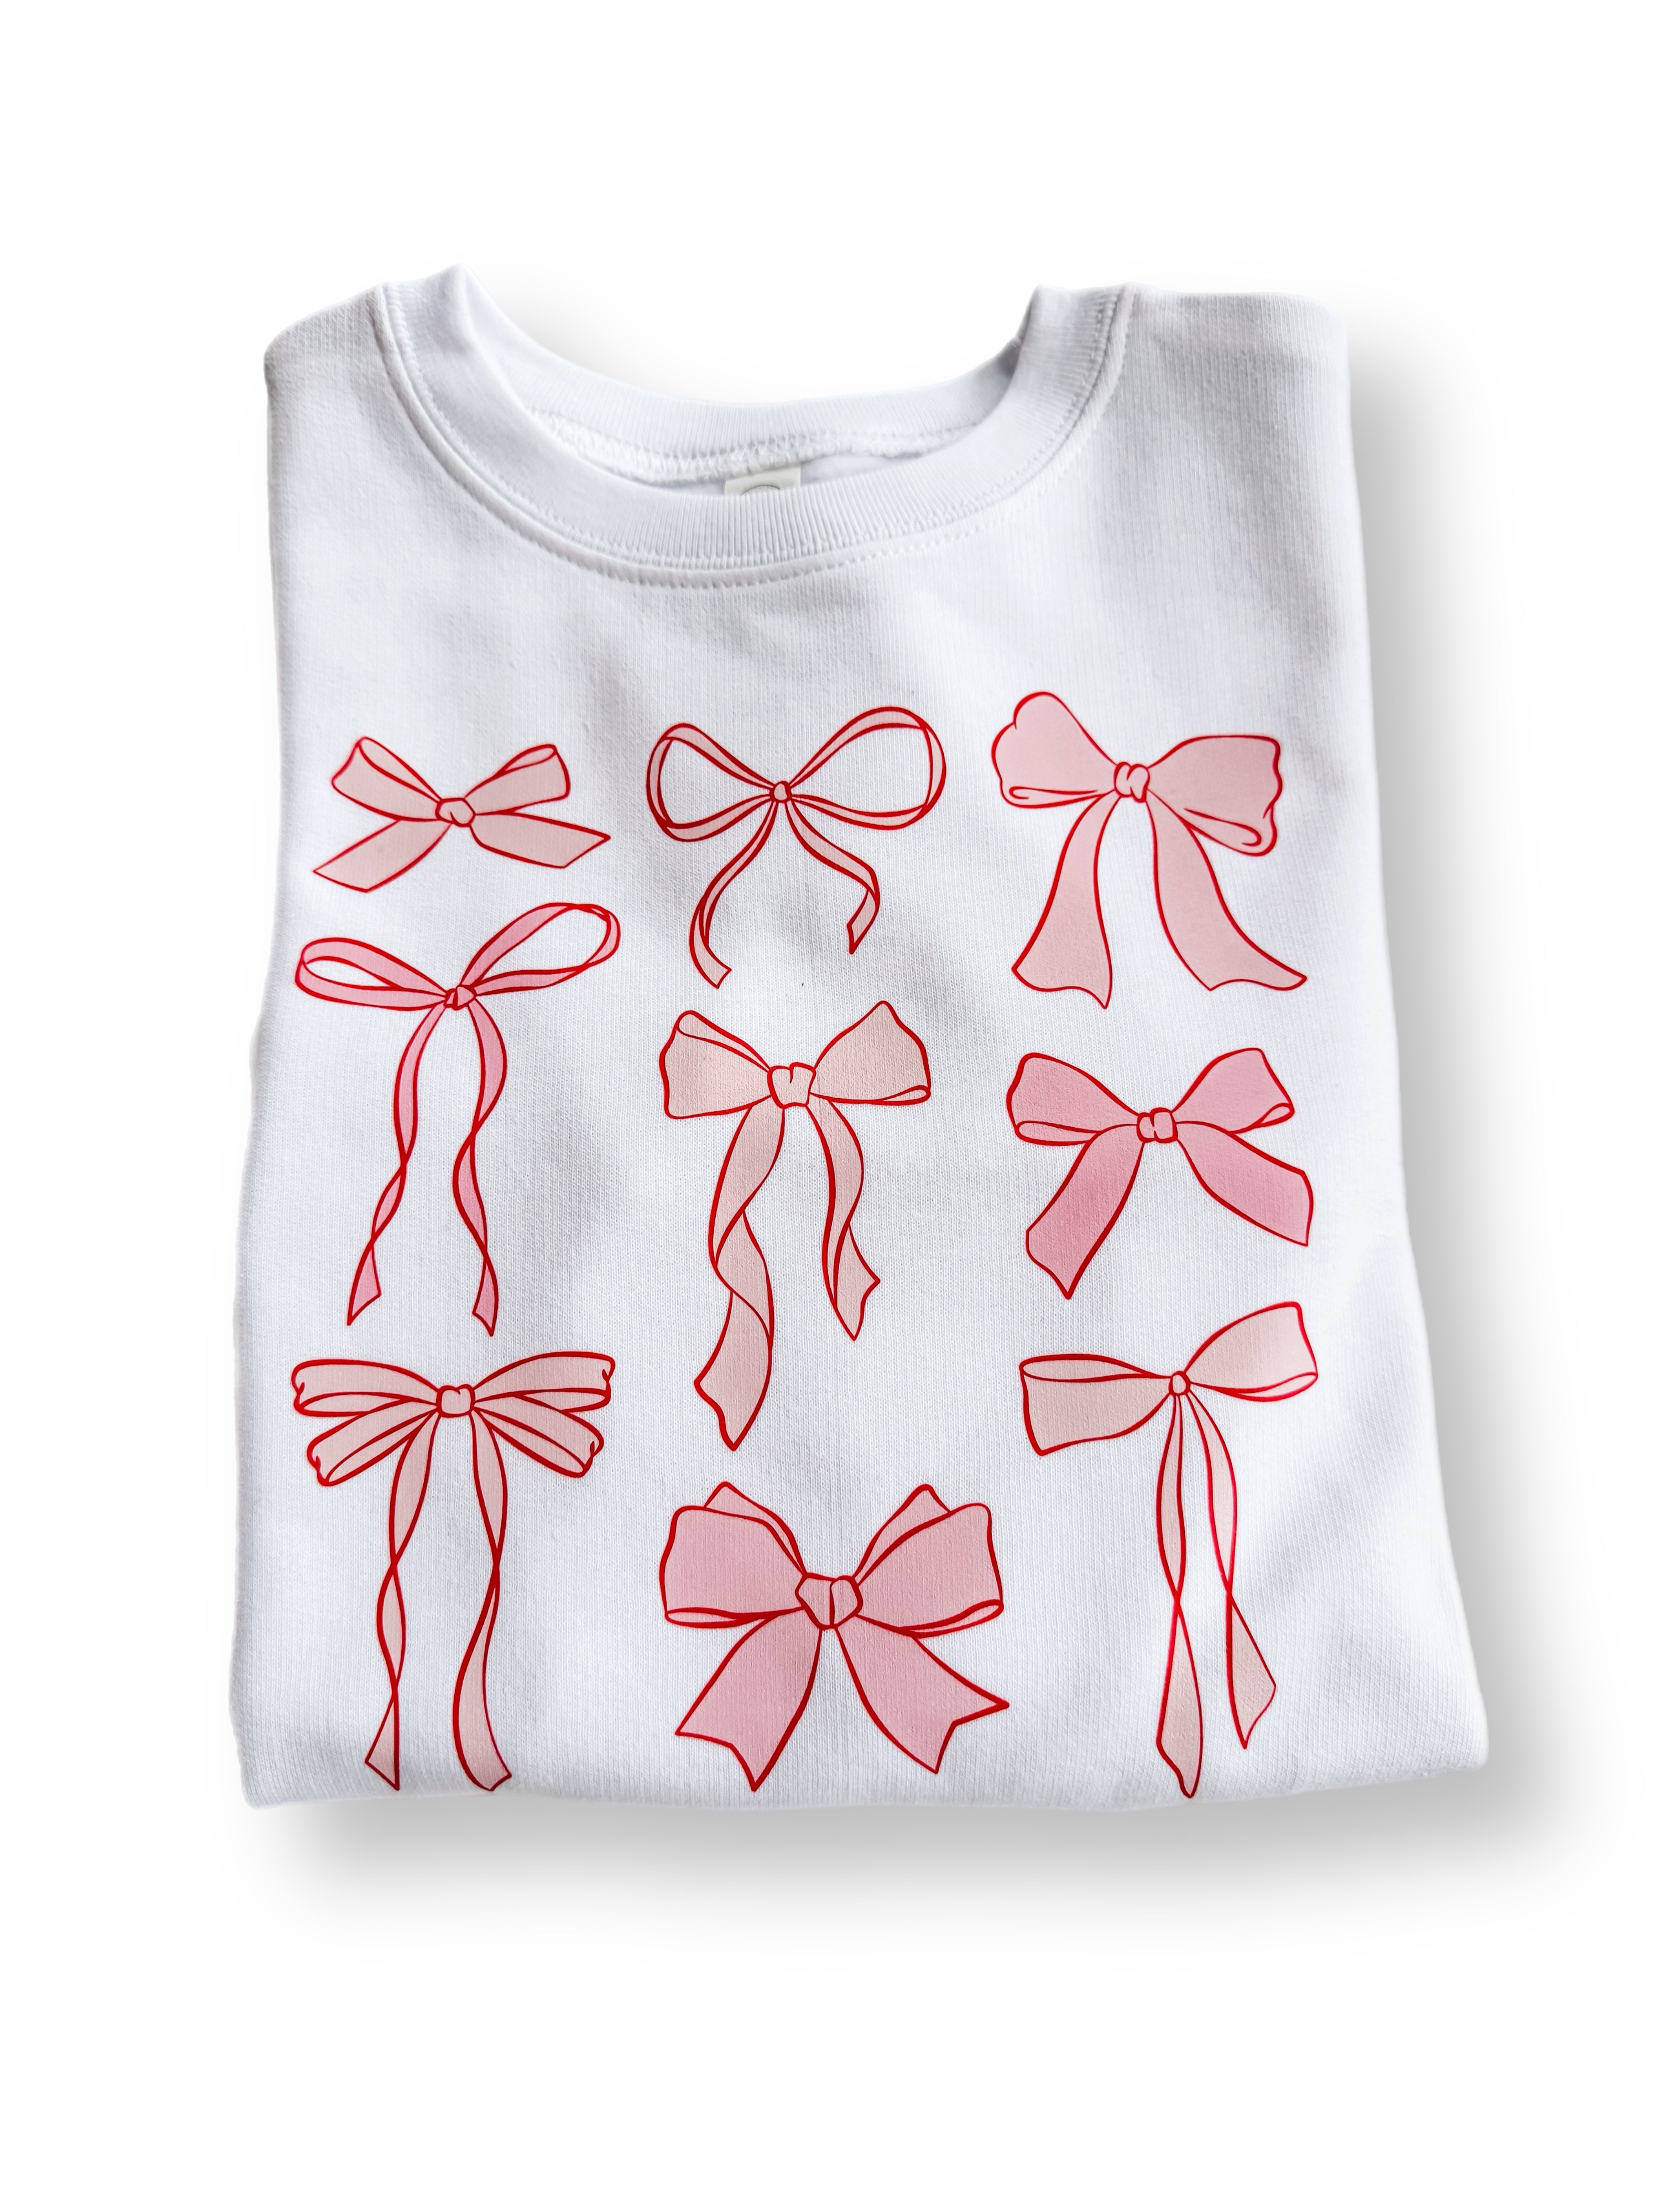 "Bow's Are a Girl's Best Friend" Tee